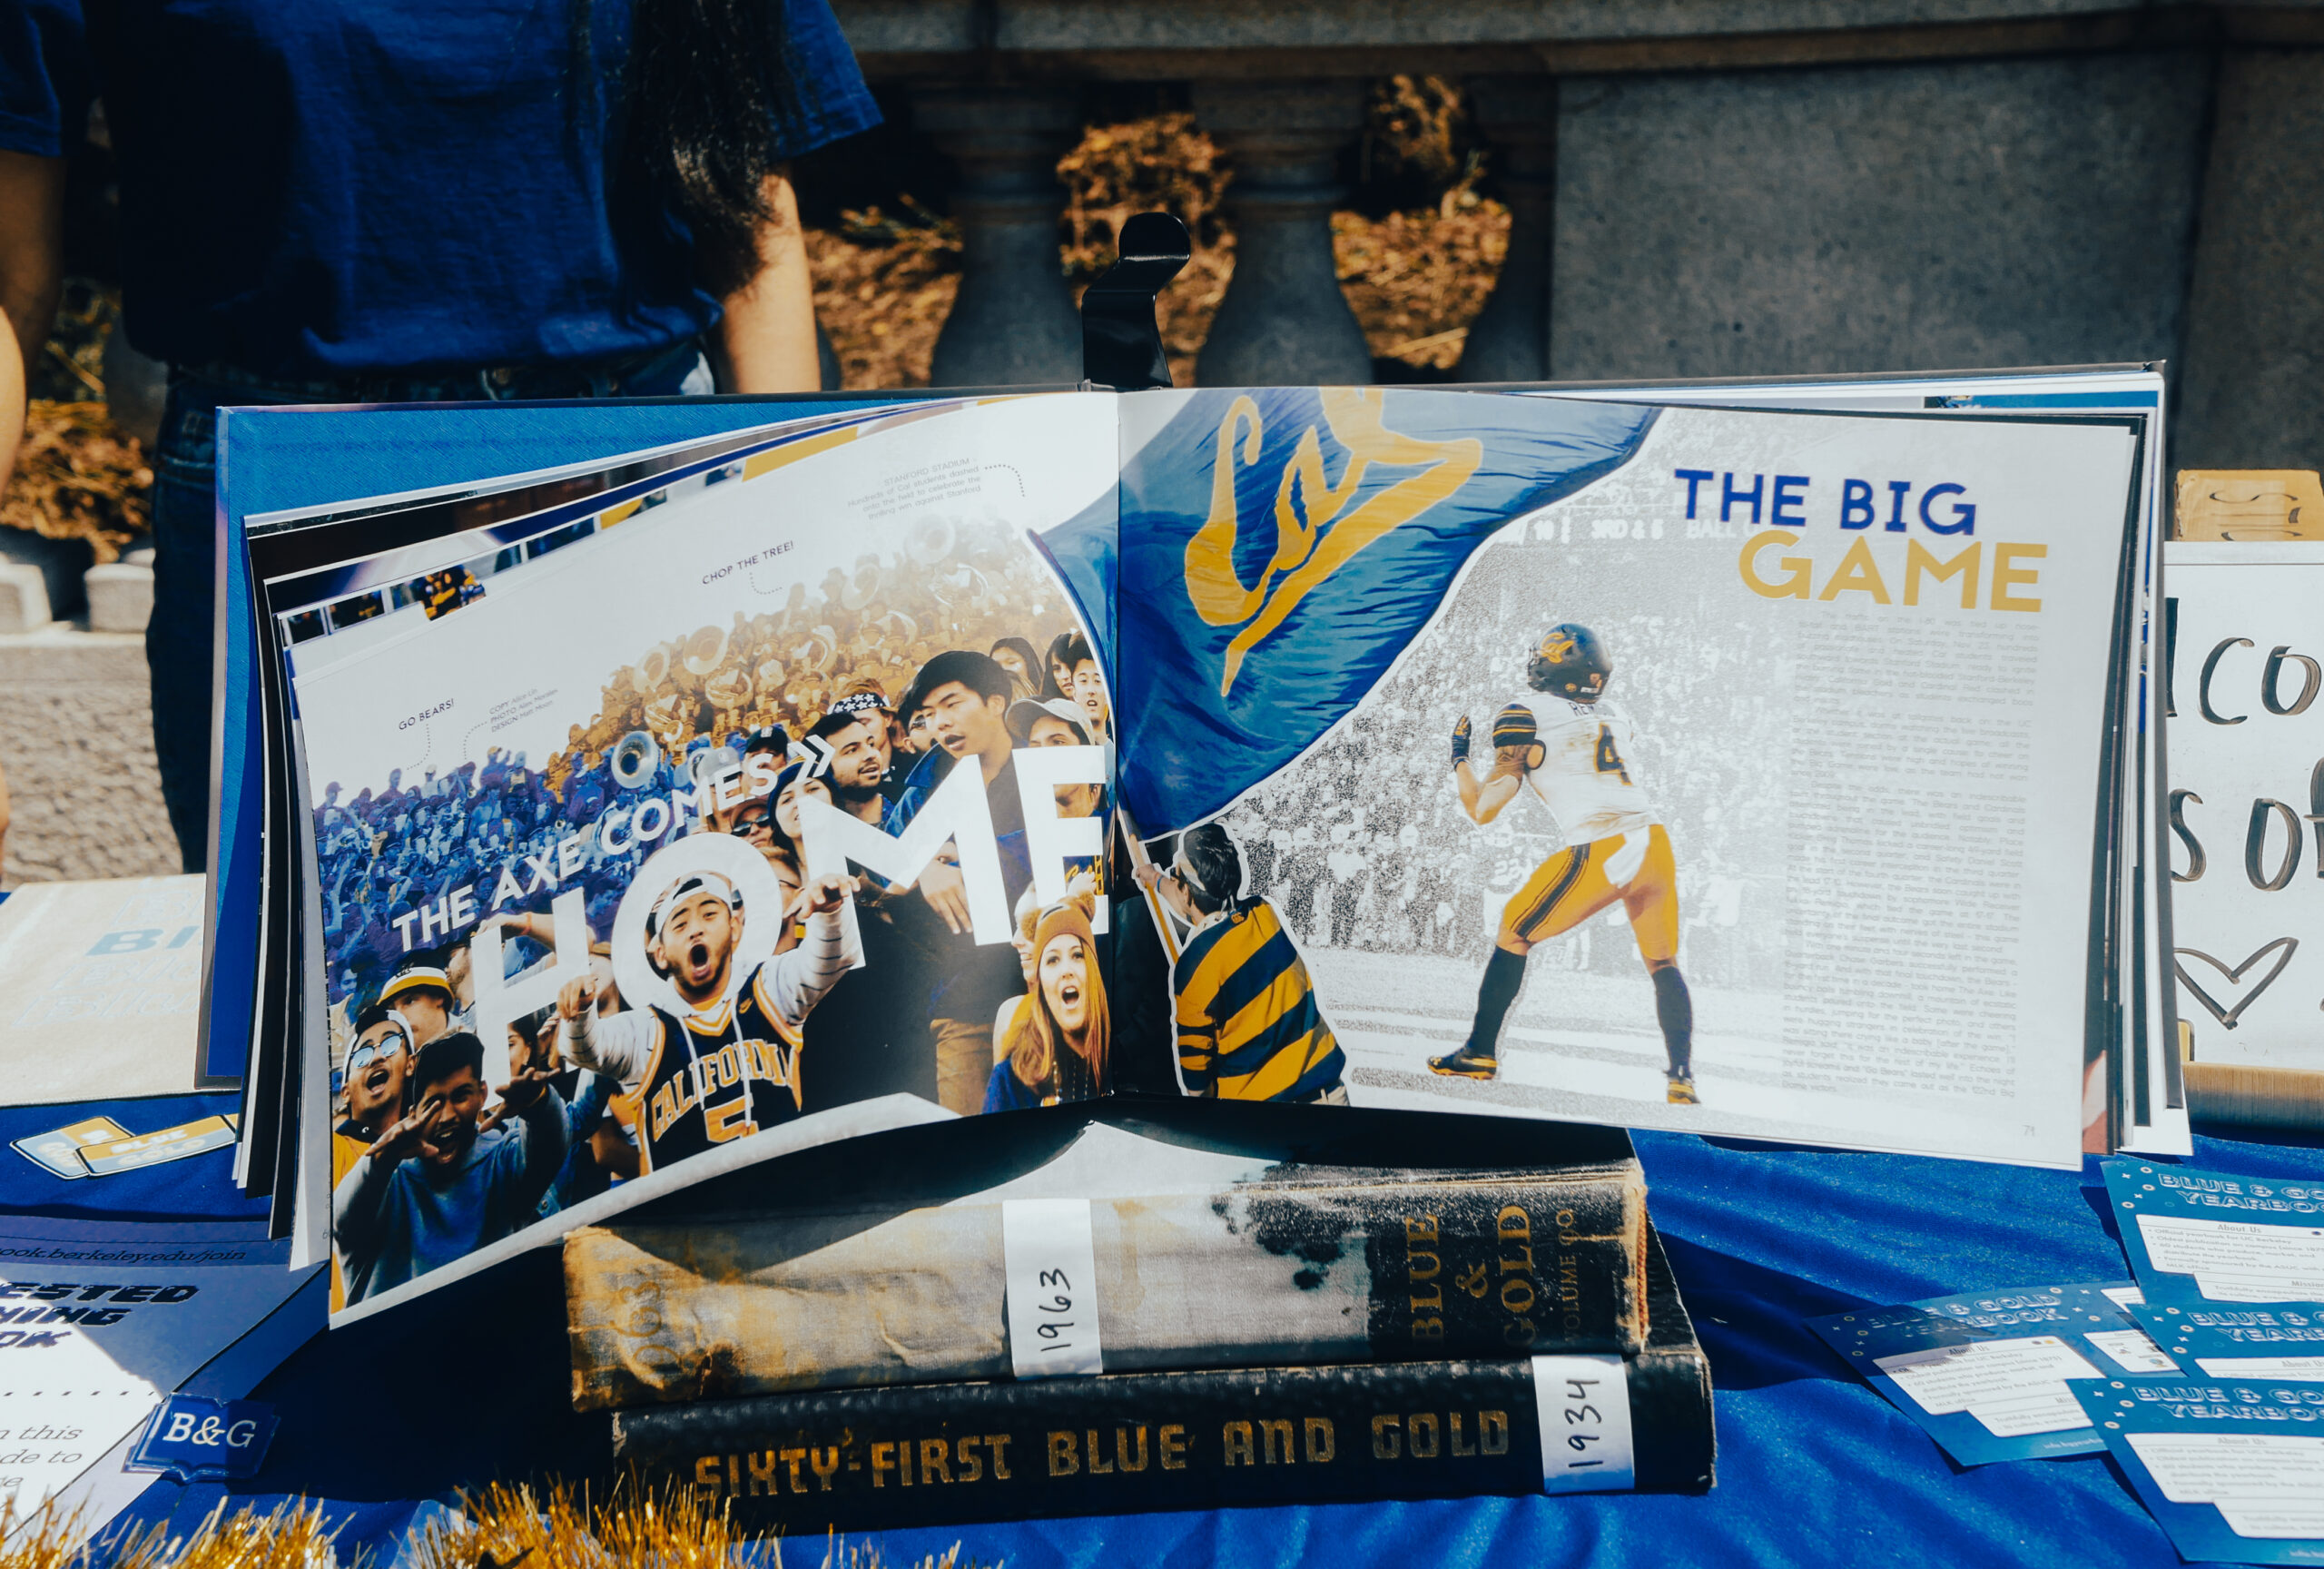 A Blue & Gold yearbook rests on a table showing two pages celebrating Cal winning the Big Game.